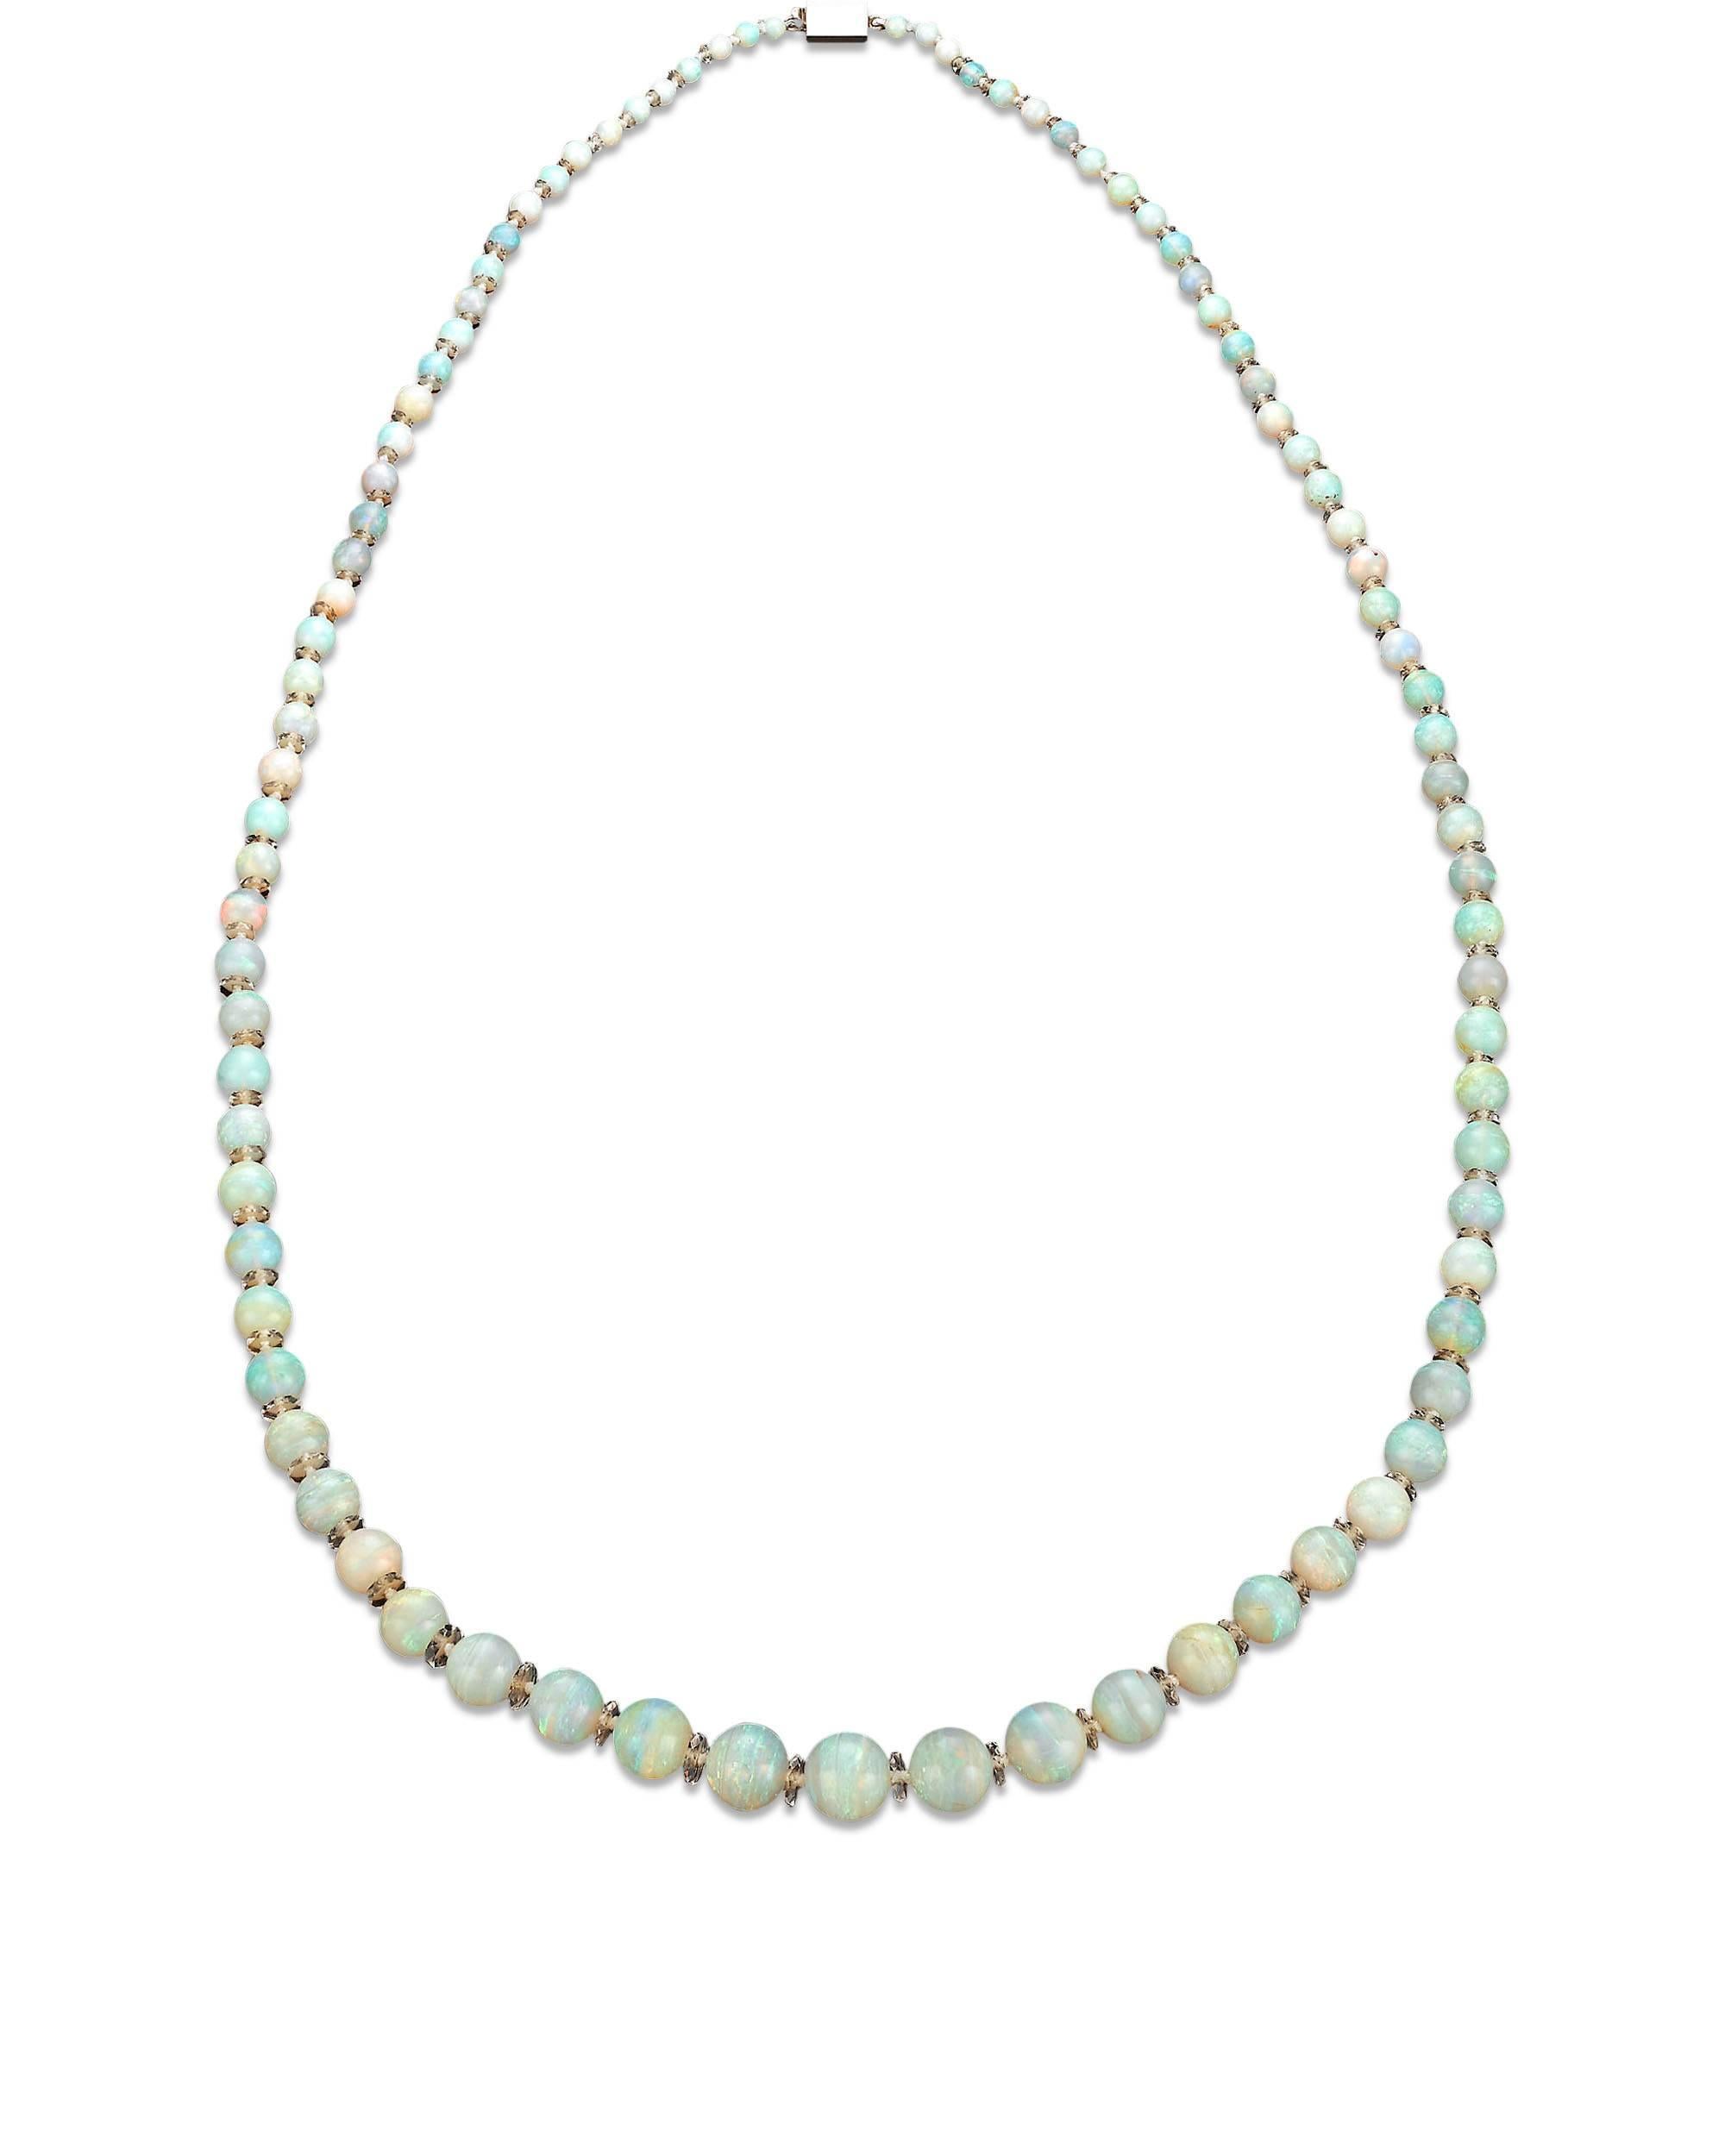 Eighty-nine Australian opals dance with color in this stunning necklace. Measuring from 4mm to 11mm, these mesmerizing gems weigh approximately 250 total carats and are separated by elegant rock crystal rondelles. To find 89 all-natural, matching